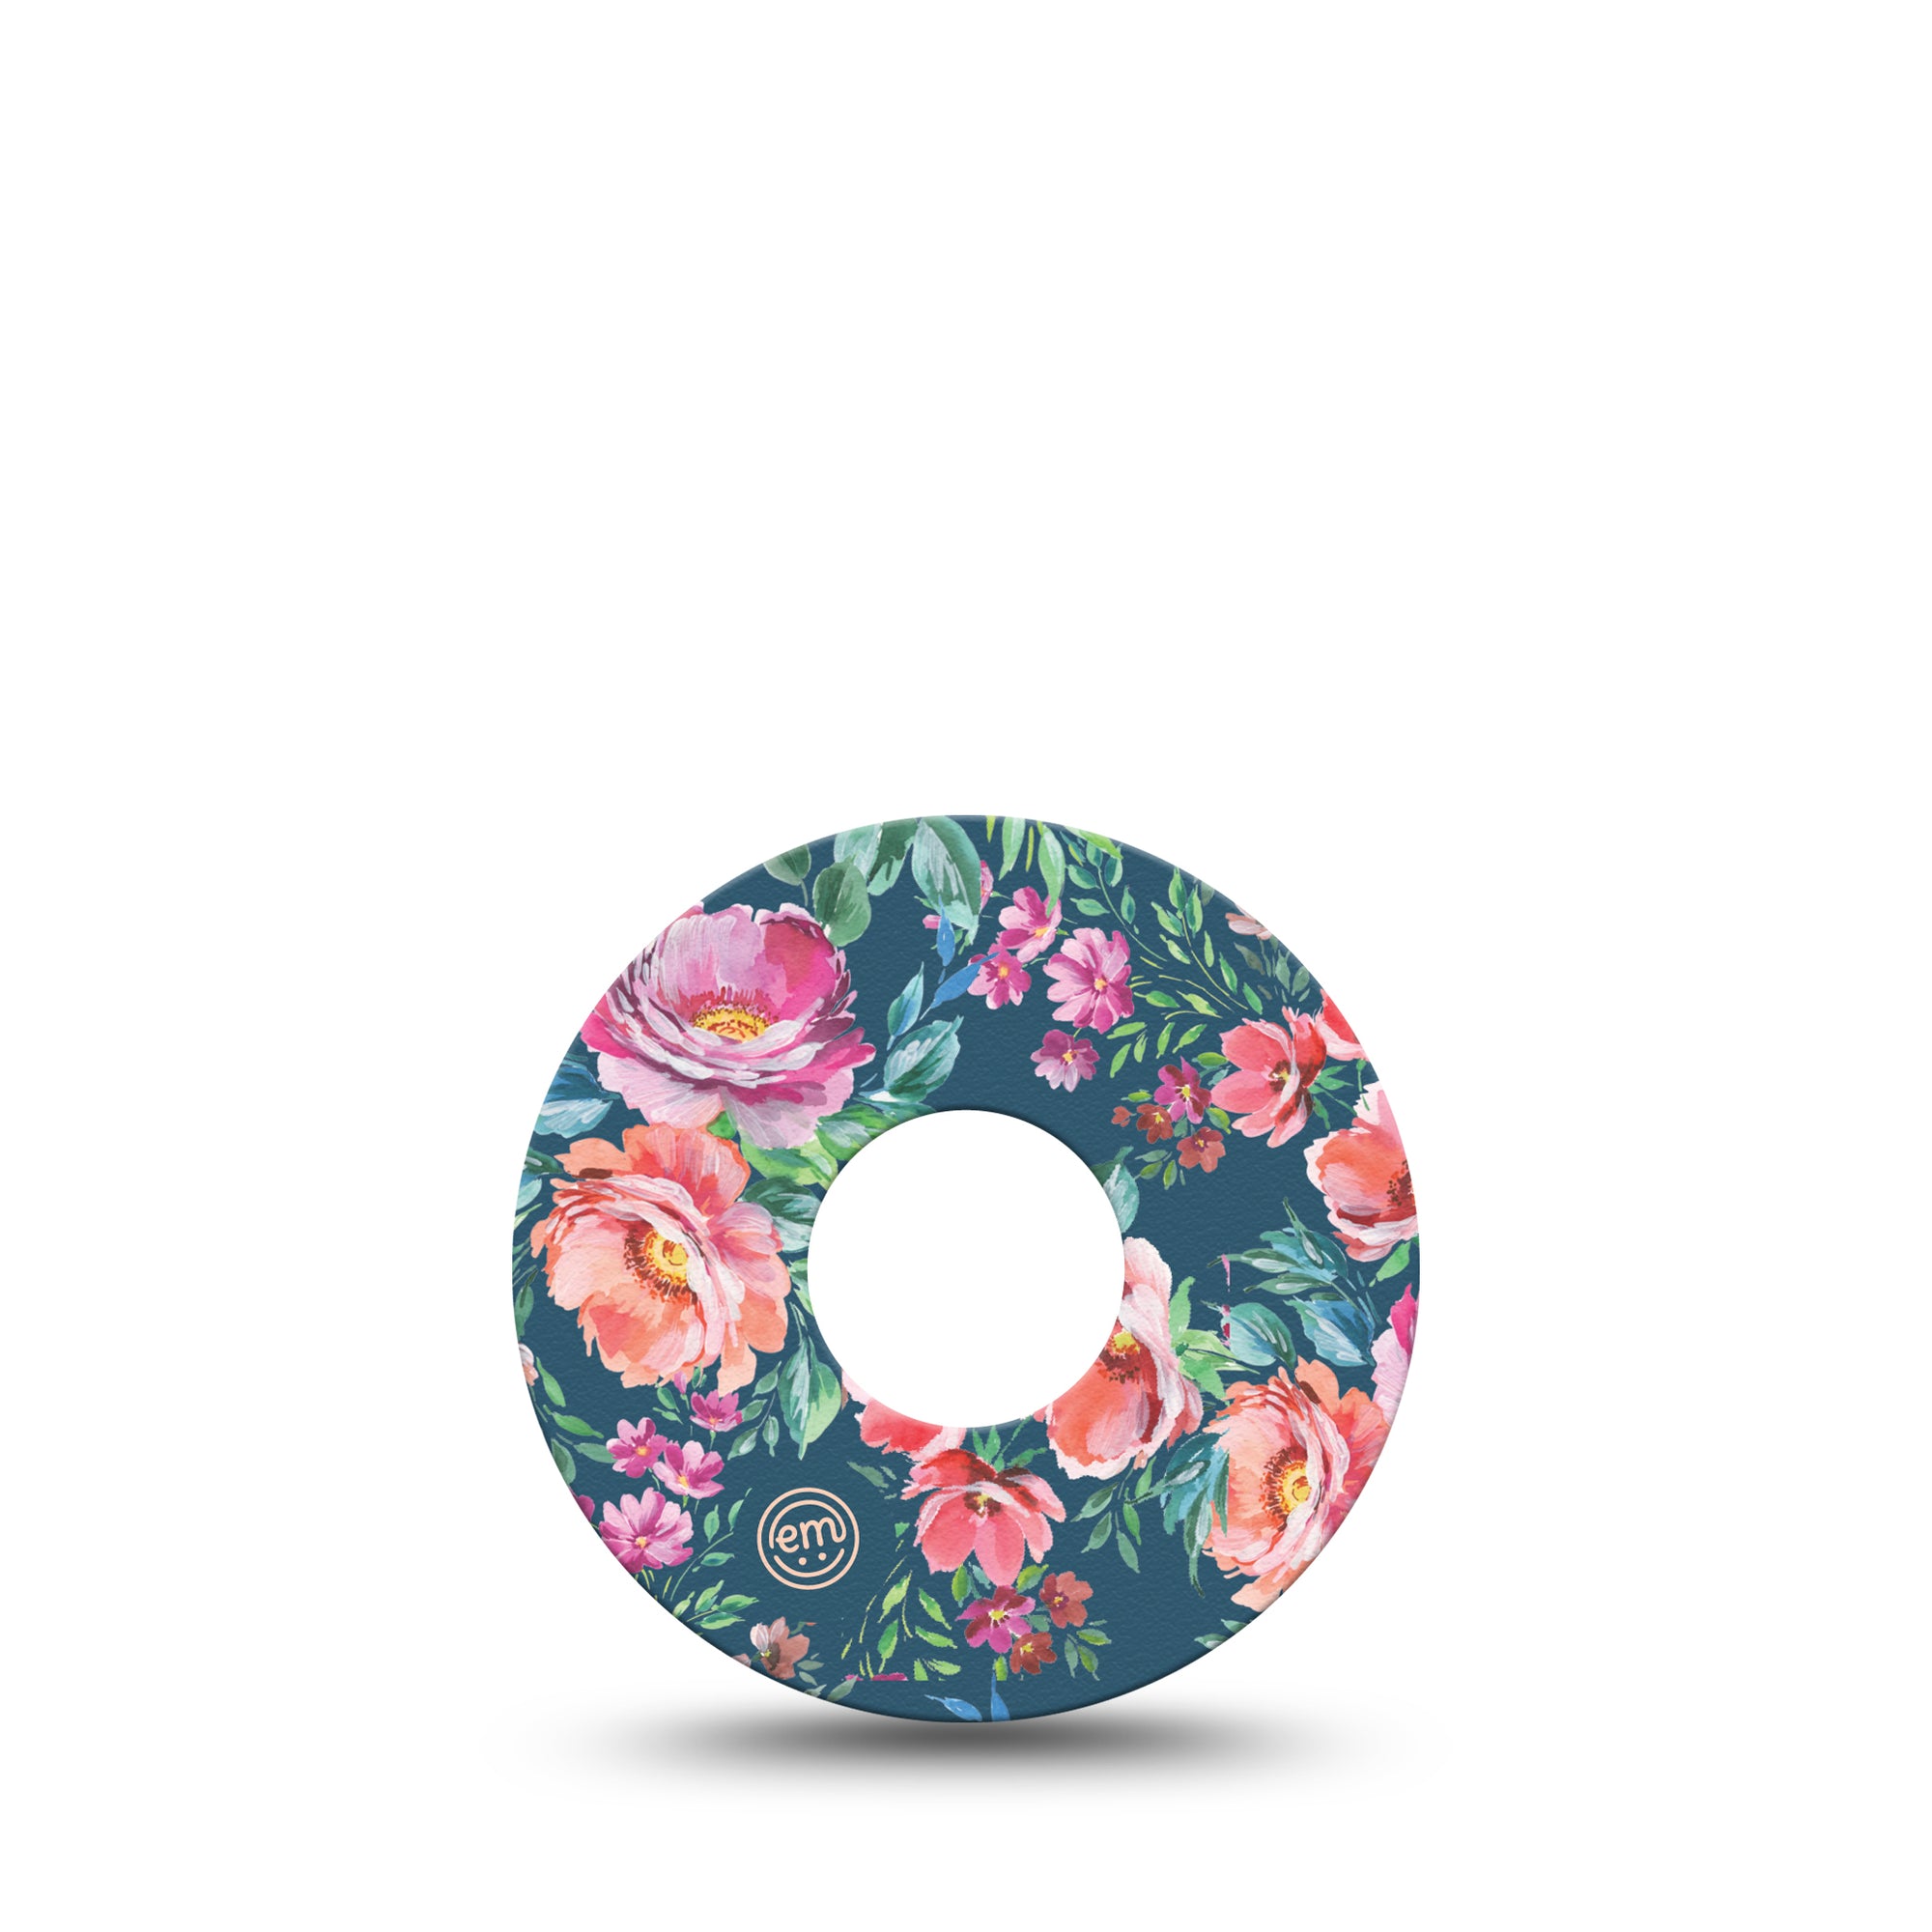 ExpressionMed Floral Enchantment Libre 3 Tape, Single, Charming Floral Themed, CGM Adhesive Patch Design